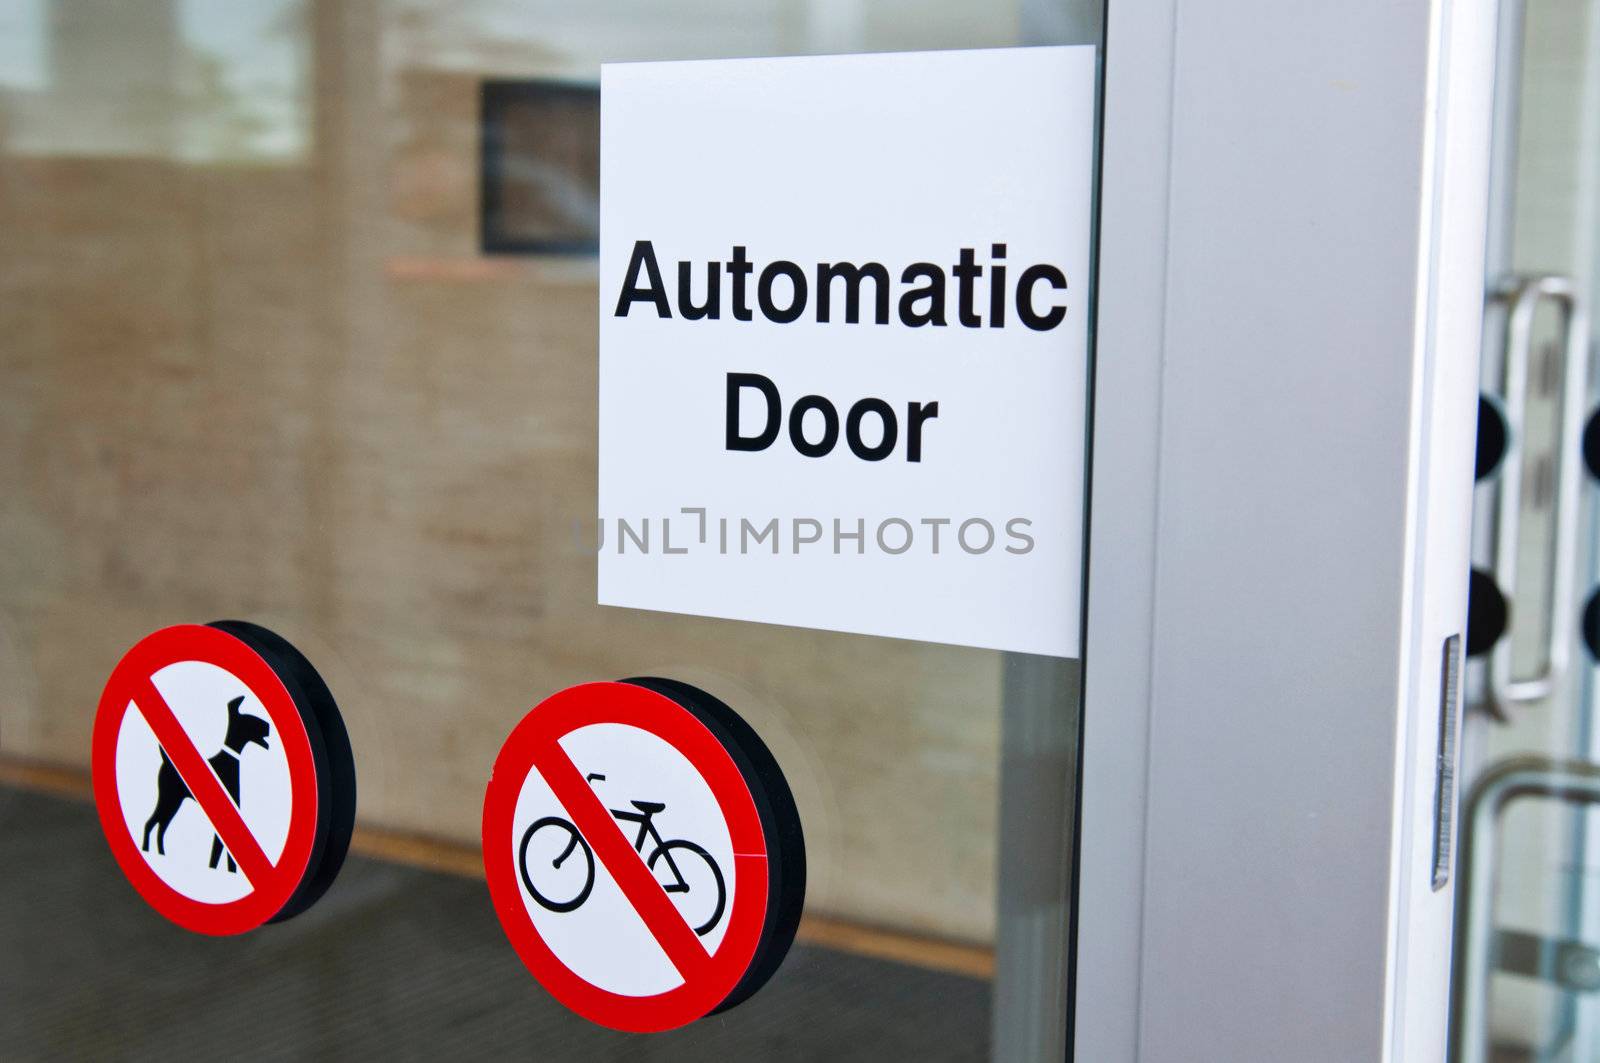 automatic door sign on shopping mall entrance (dogs and bicycles are forbidden)